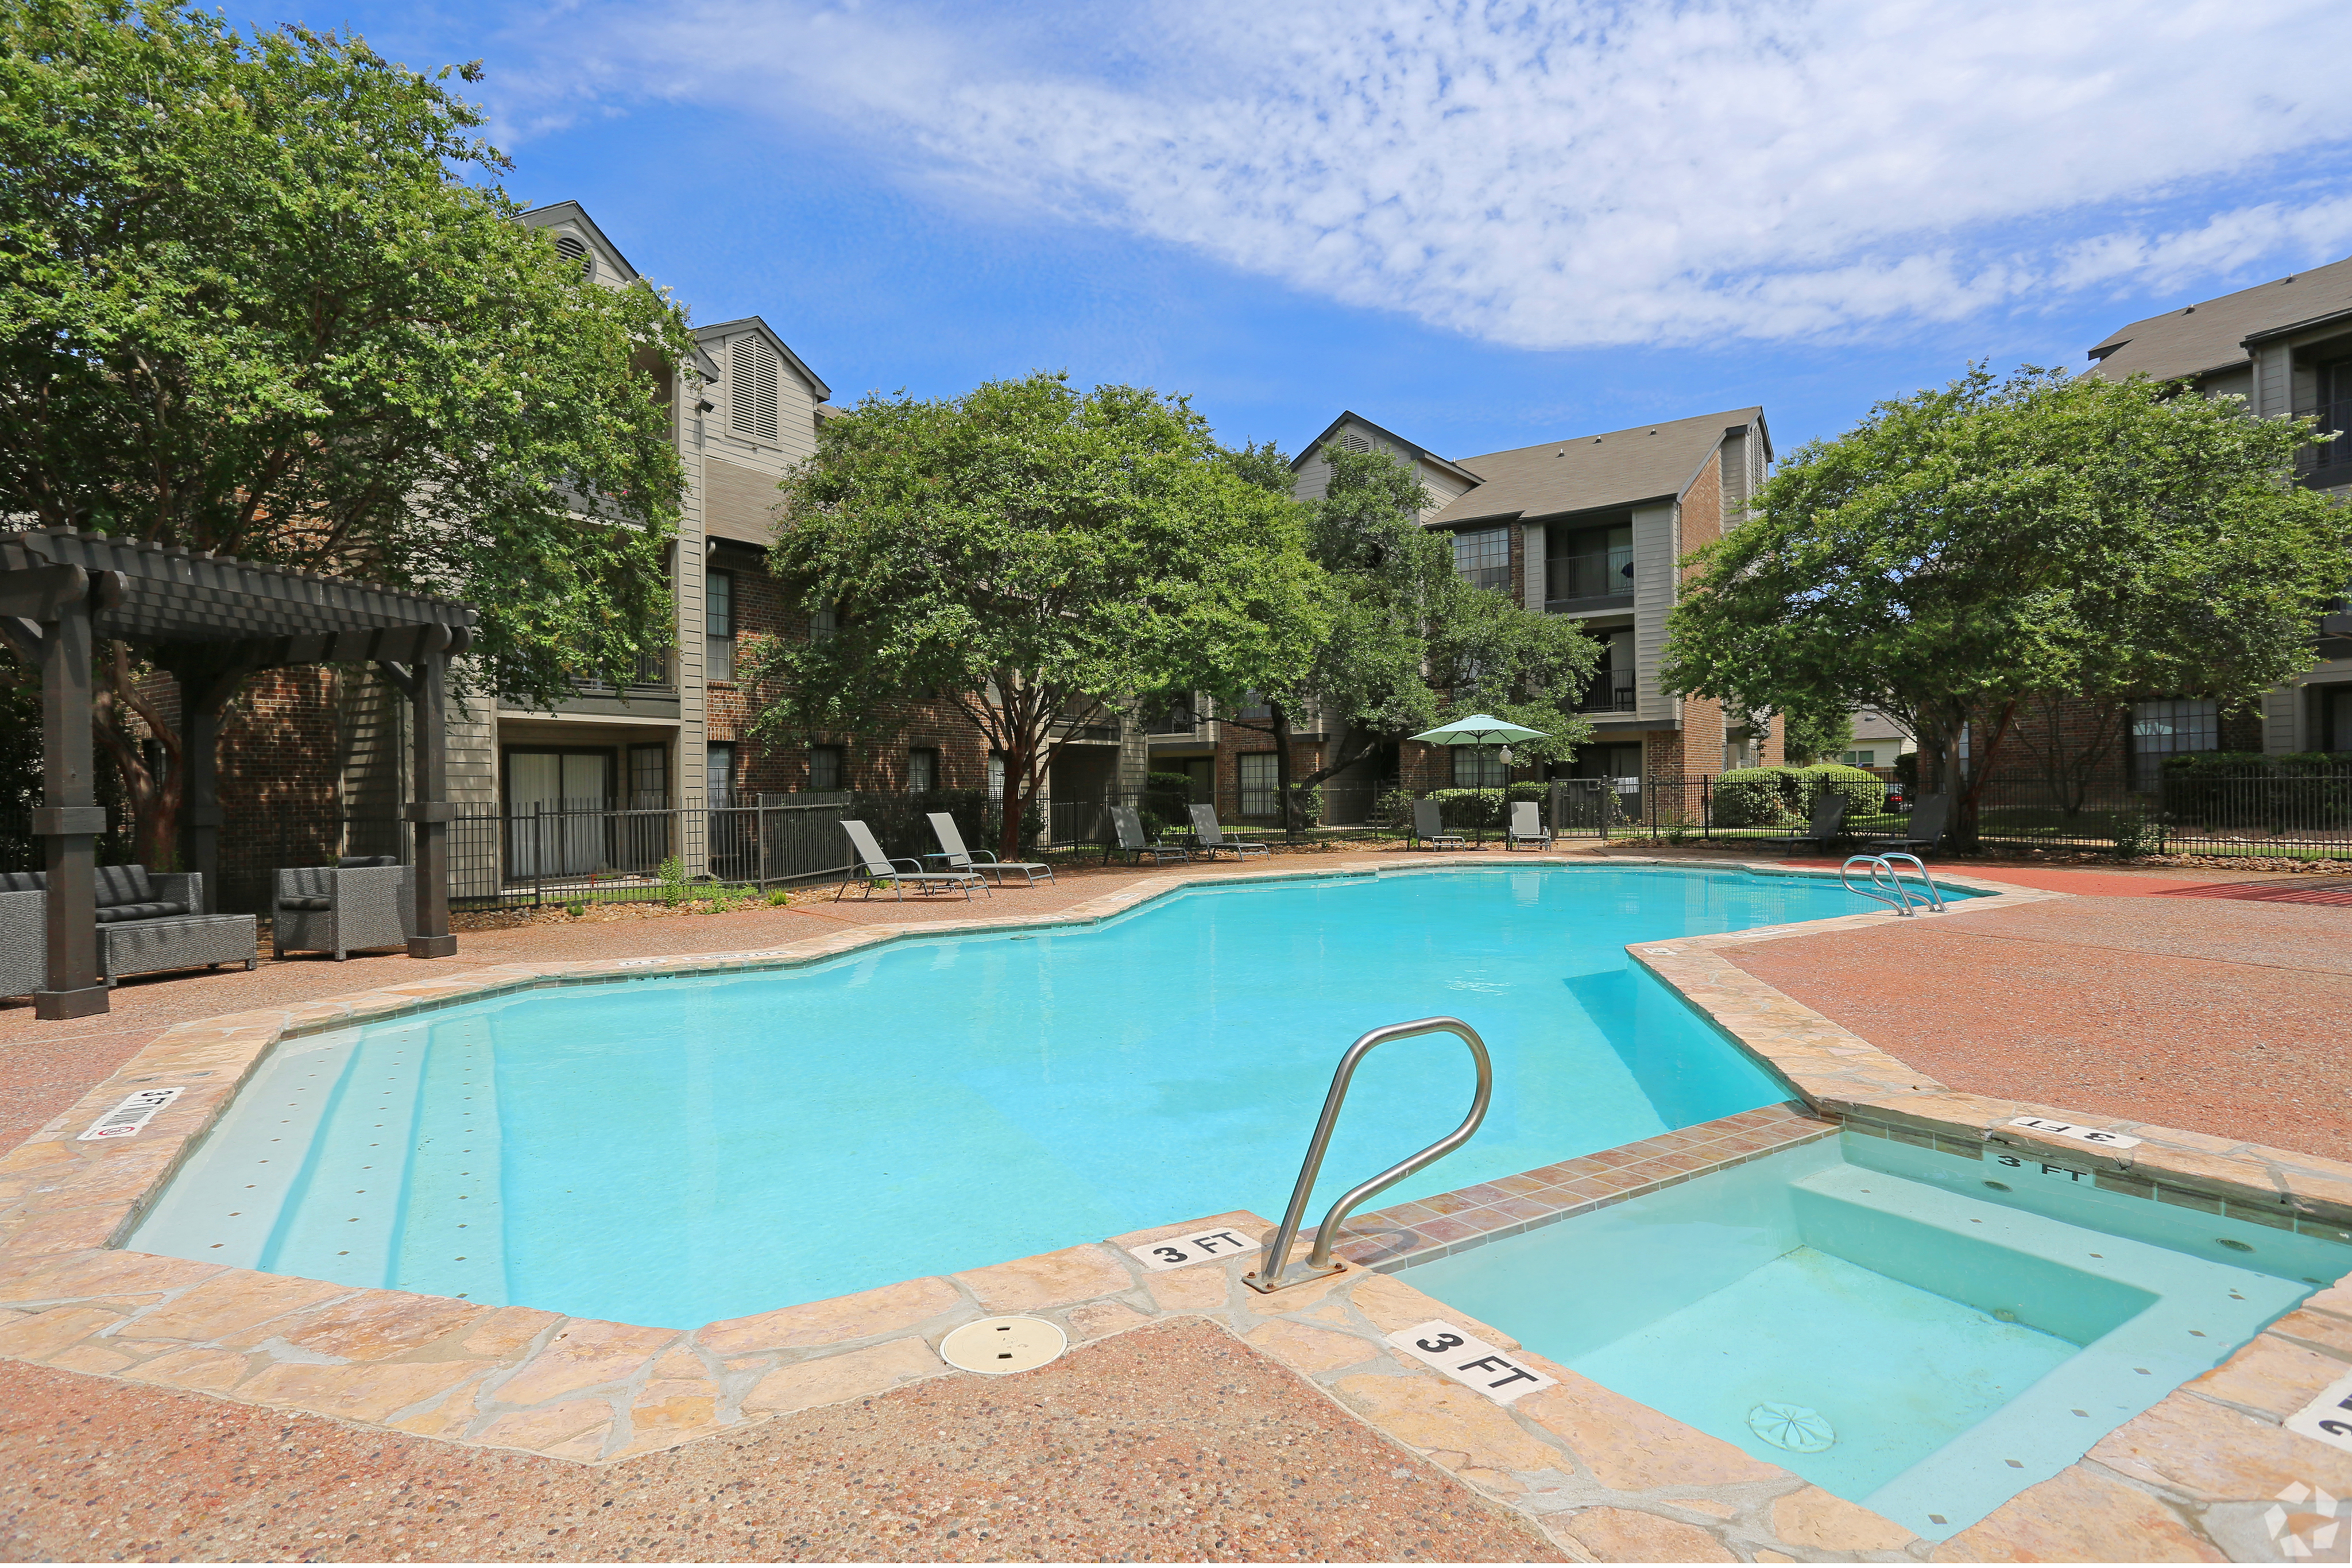 Apartments in San Antonio for Rent - Westlake Villas Large Swimming Pool With Hot Tub